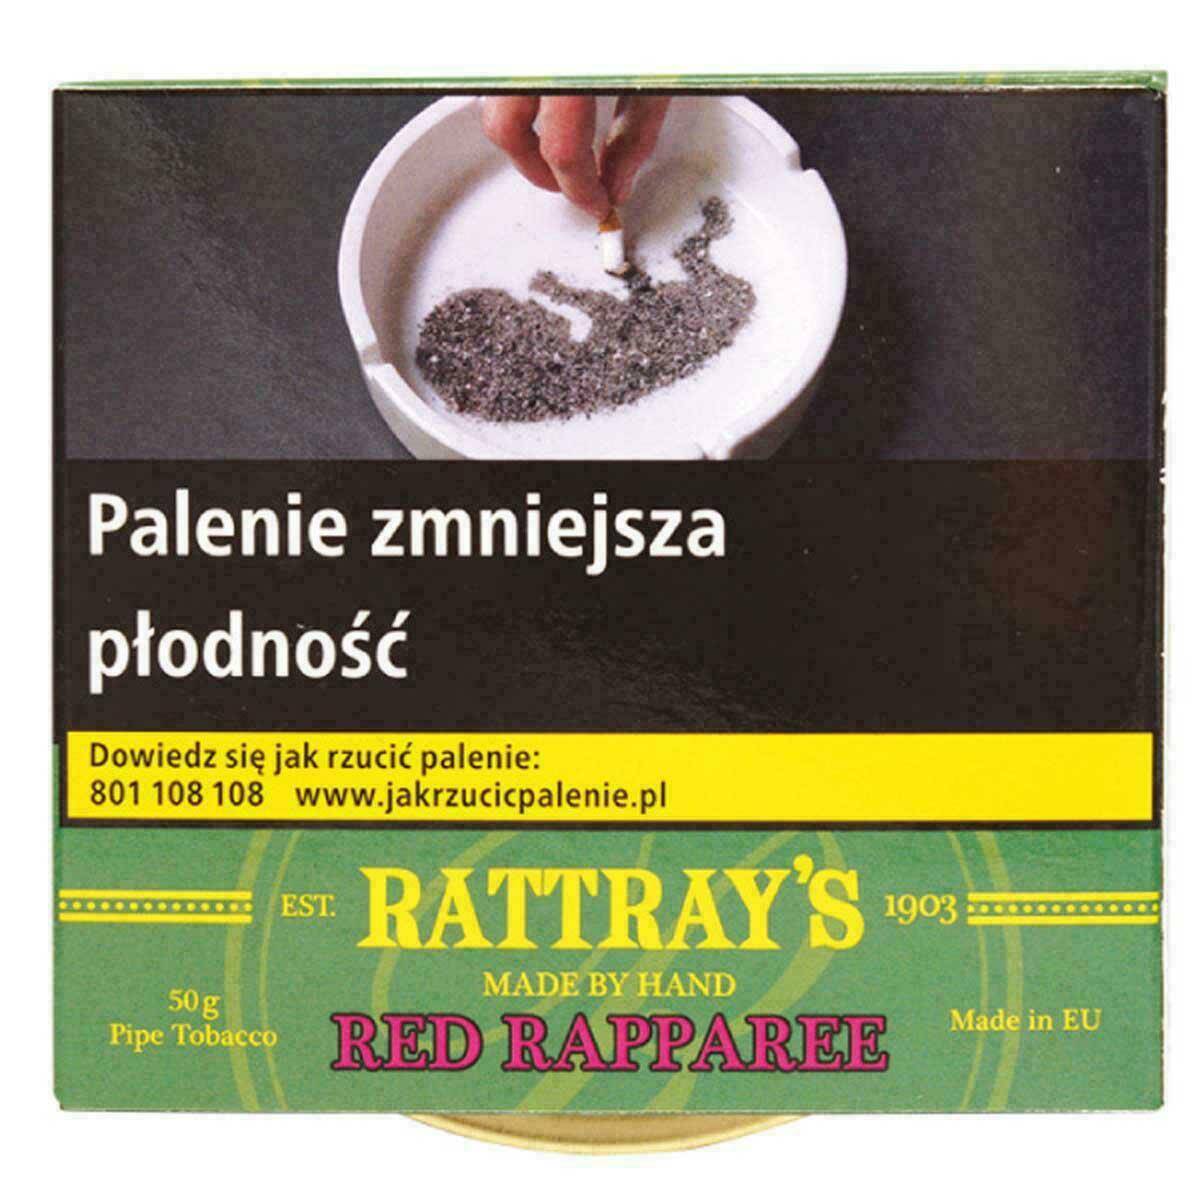 Tobacco Rattray Red Rapparee 50g (79,90)